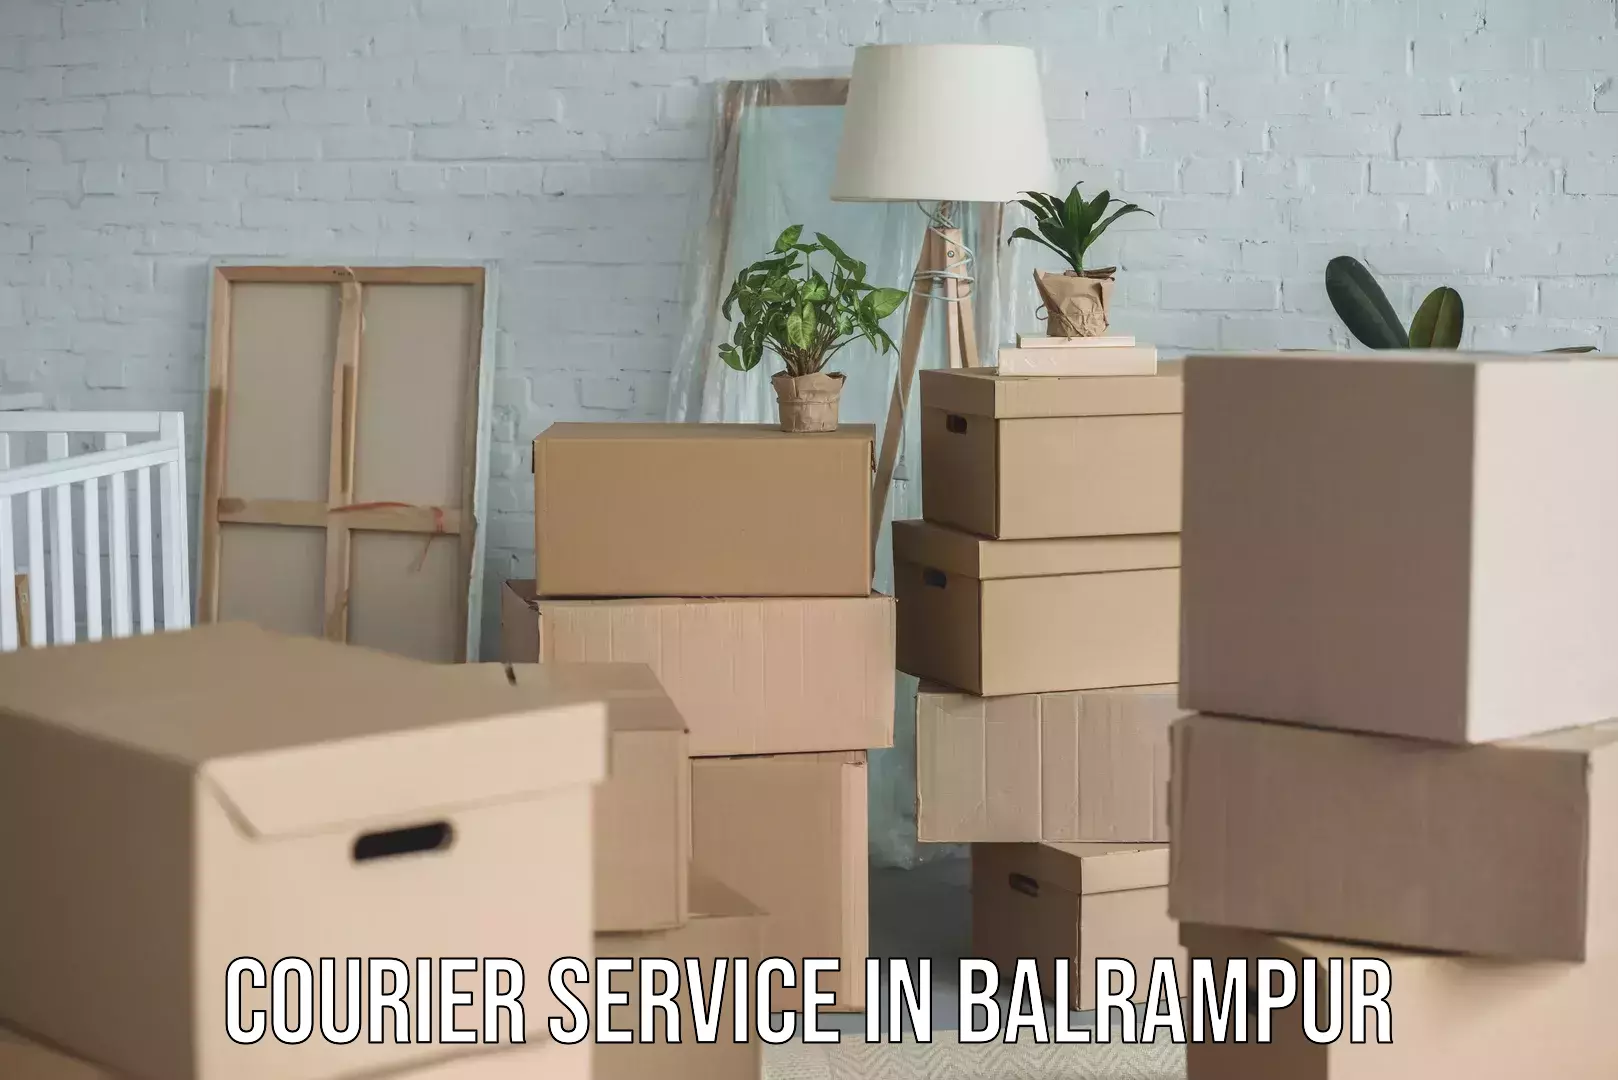 Quality courier partnerships in Balrampur